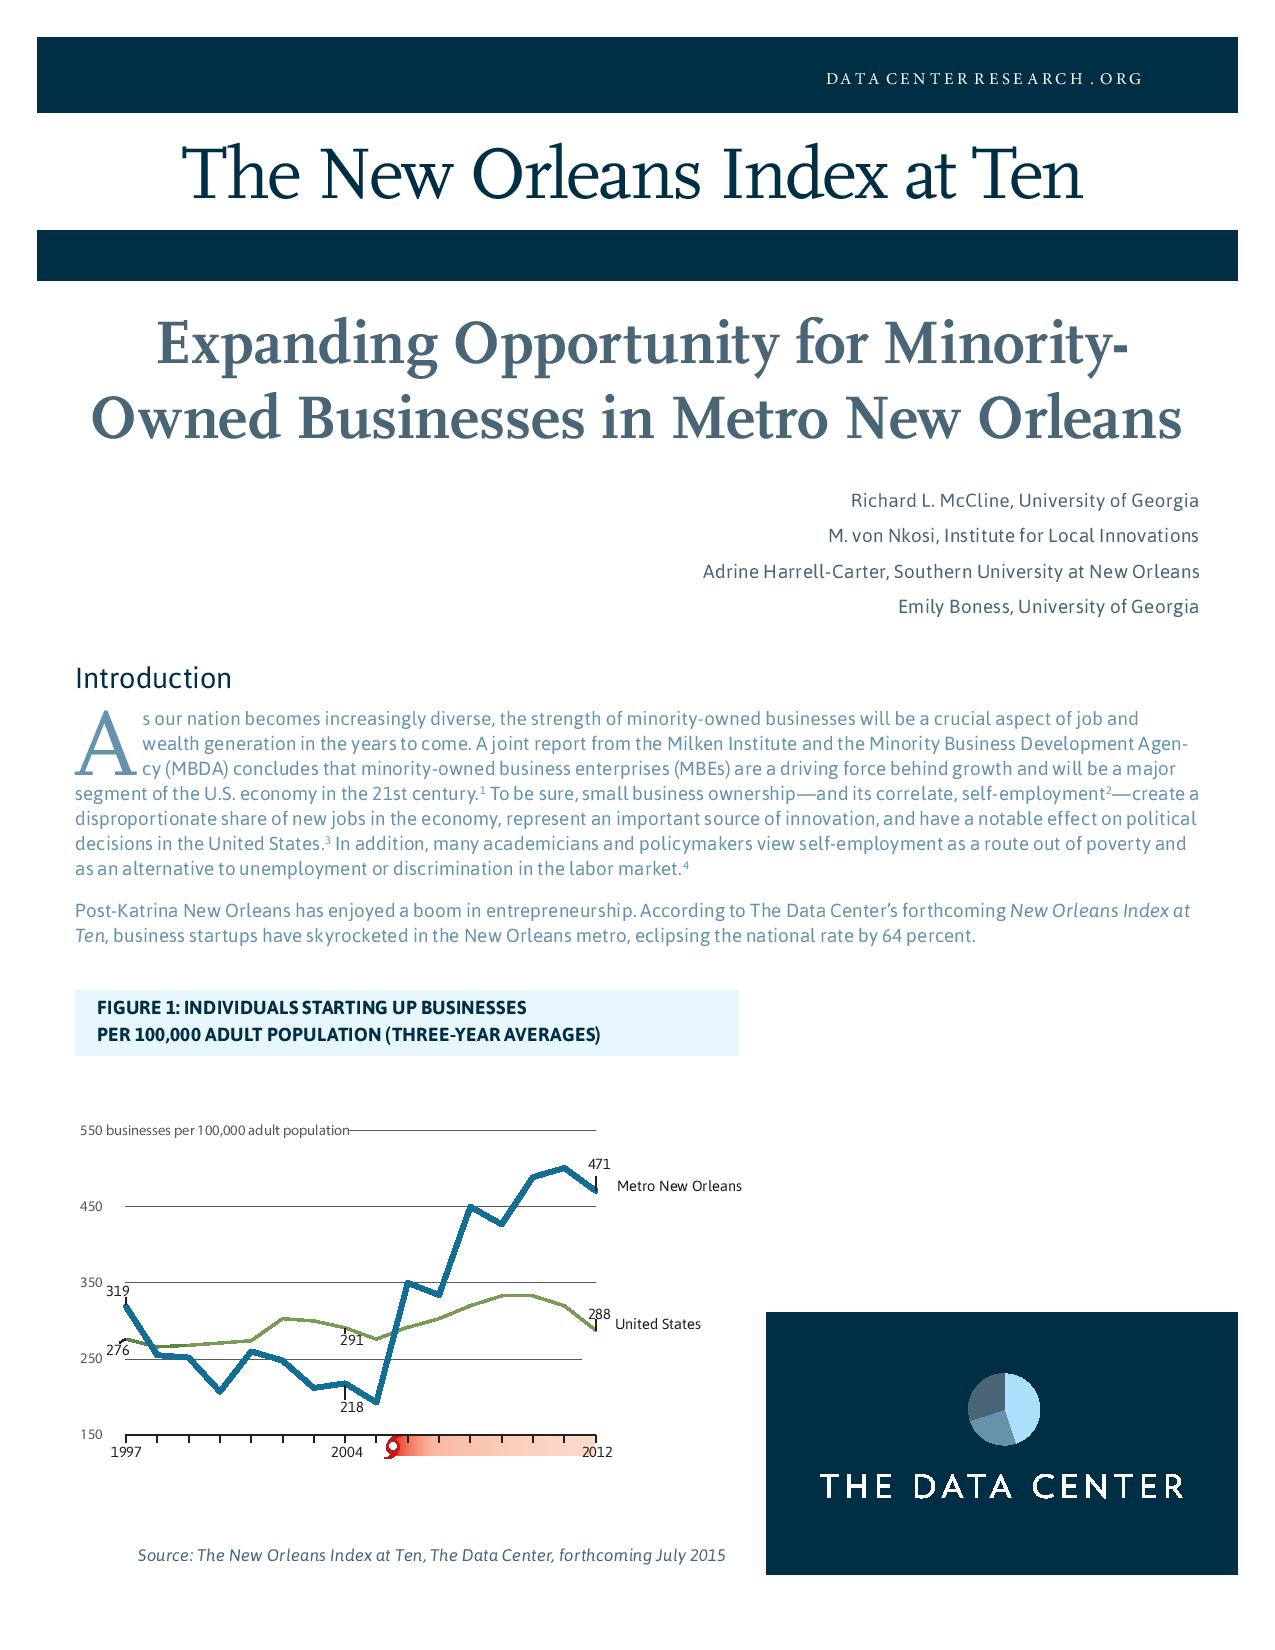 Expanding Opportunity for Minority-Owned Businesses in Metro New Orleans